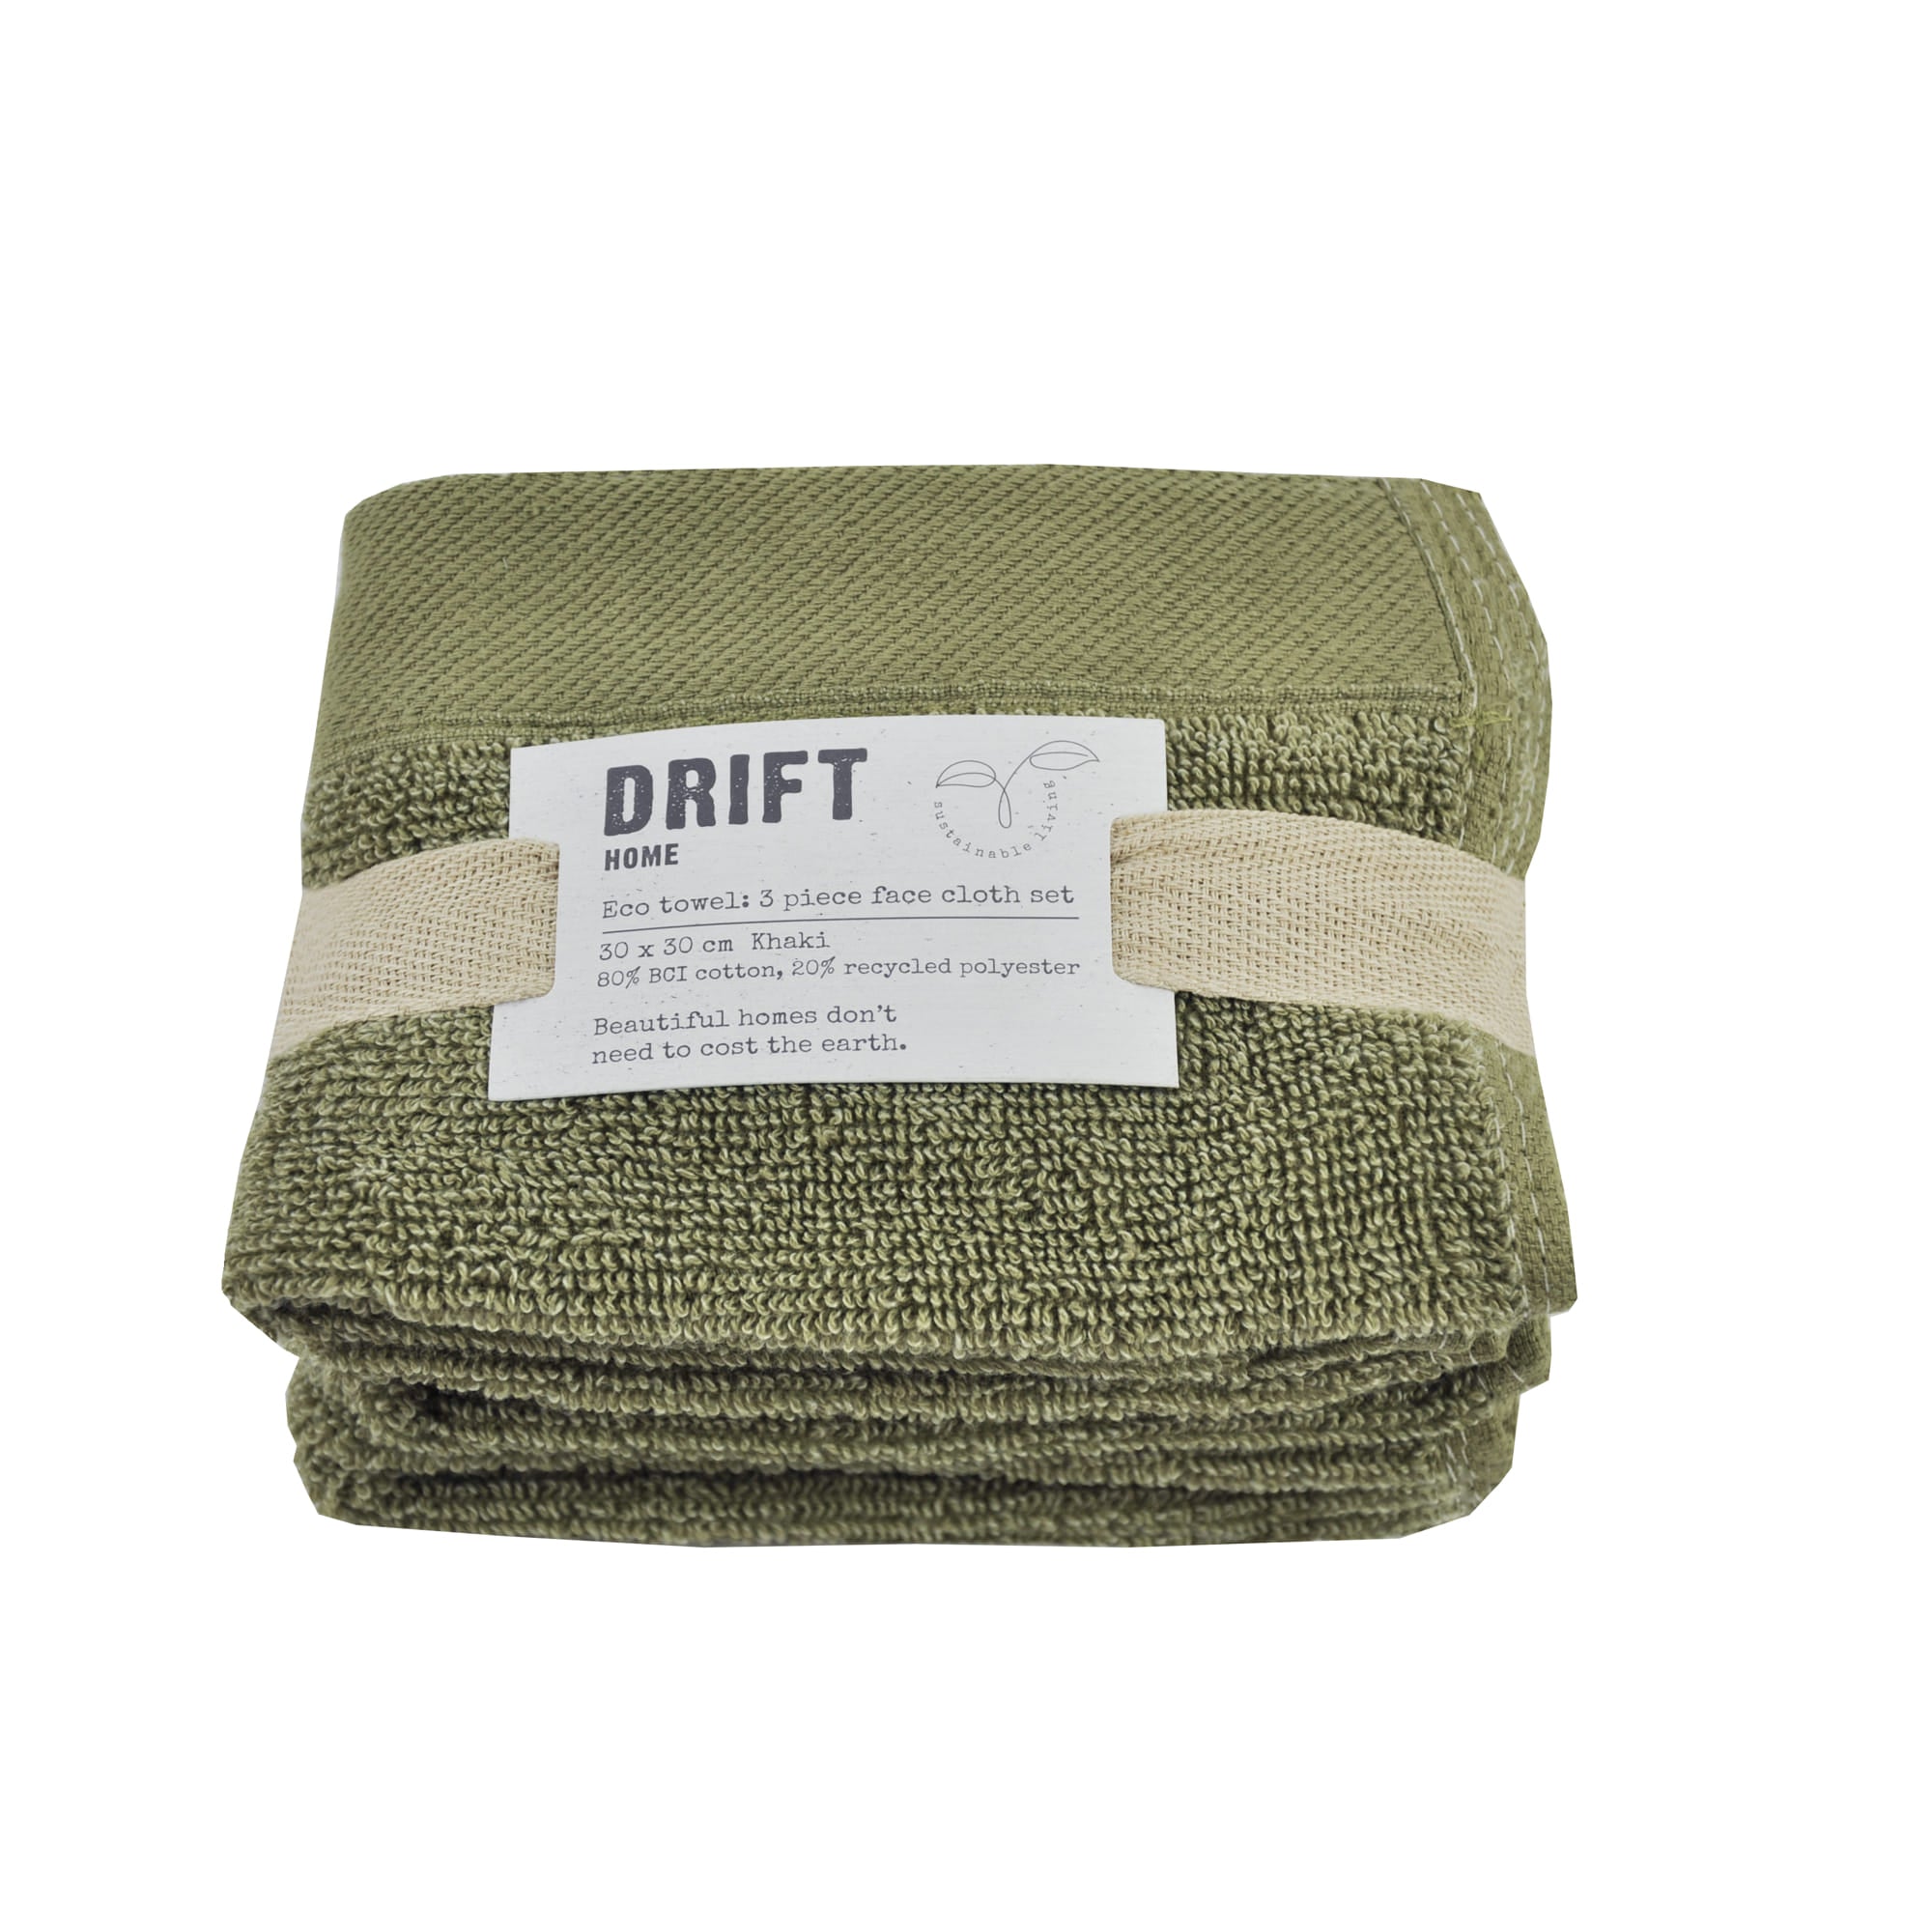 Face Cloth (3 pack) Abode Eco by Drift Home in Khaki